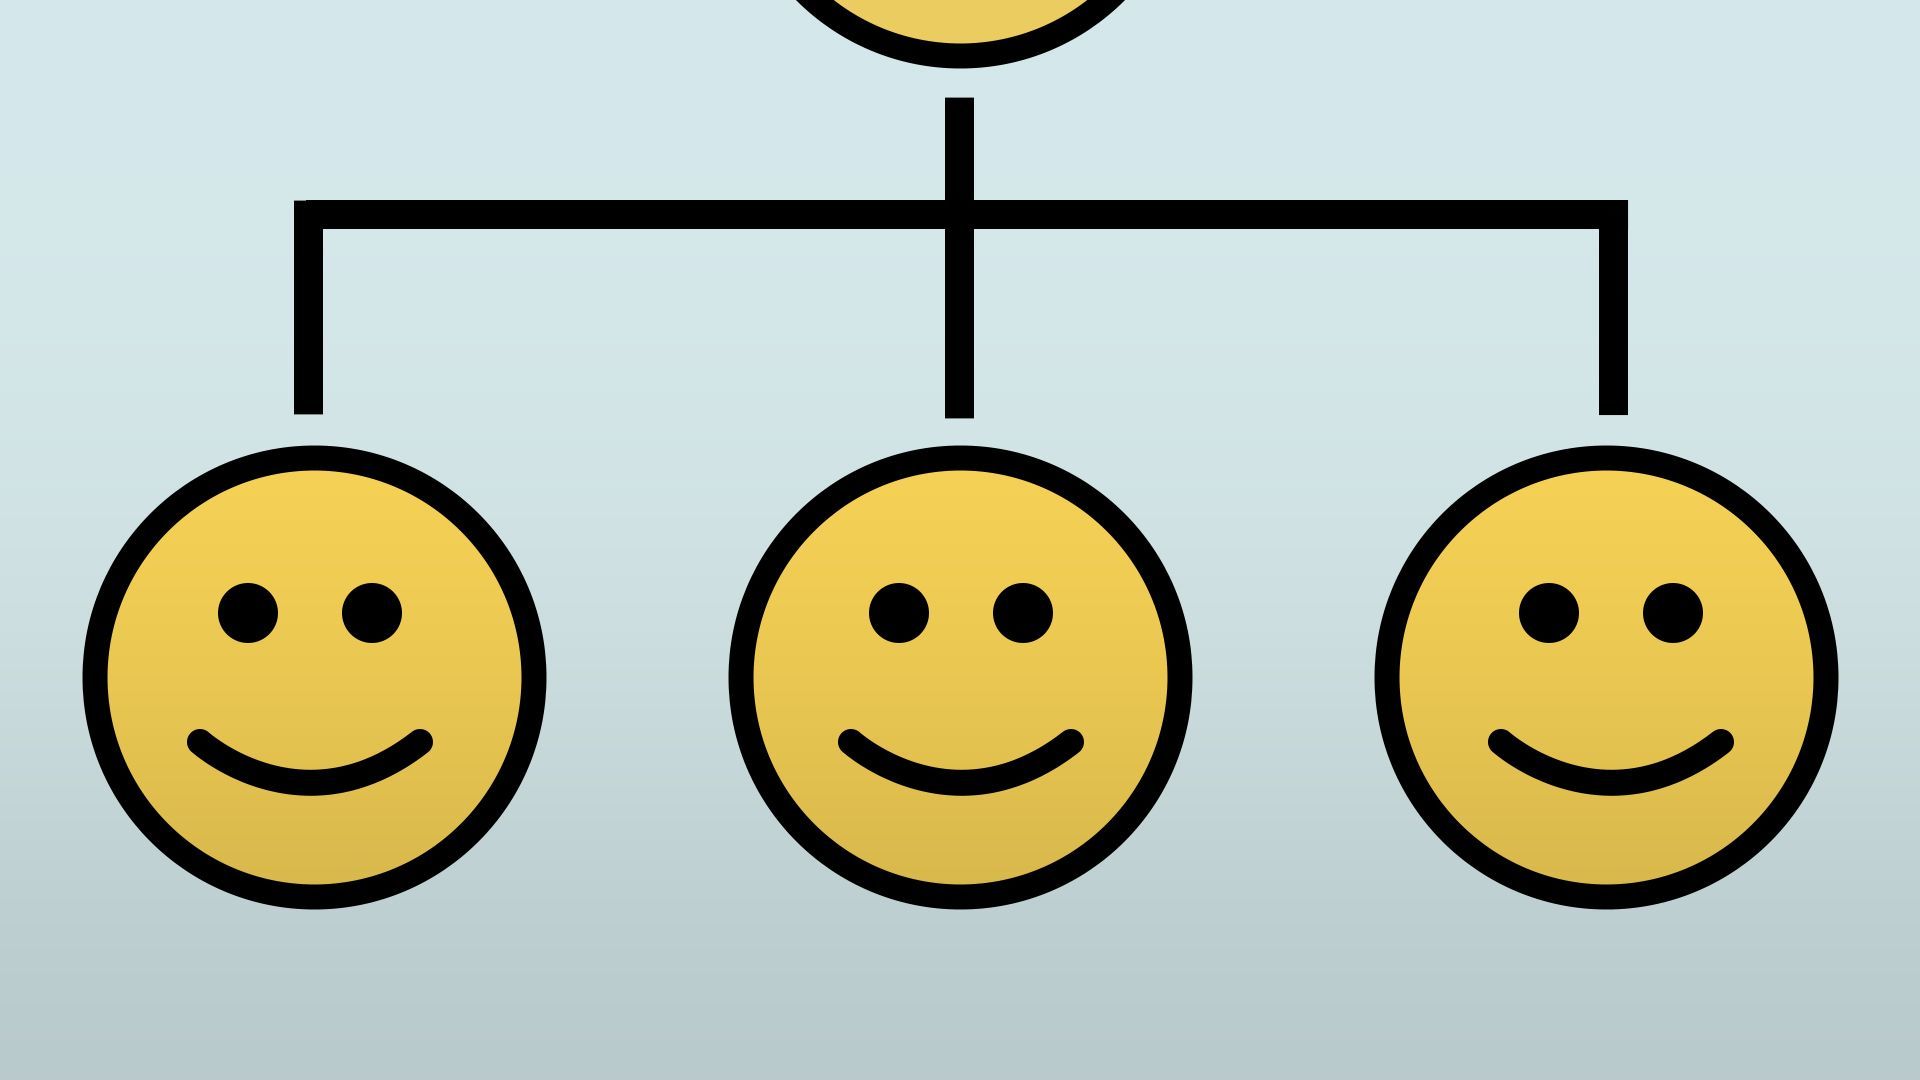 Illustration of a family tree with three smiley faces.